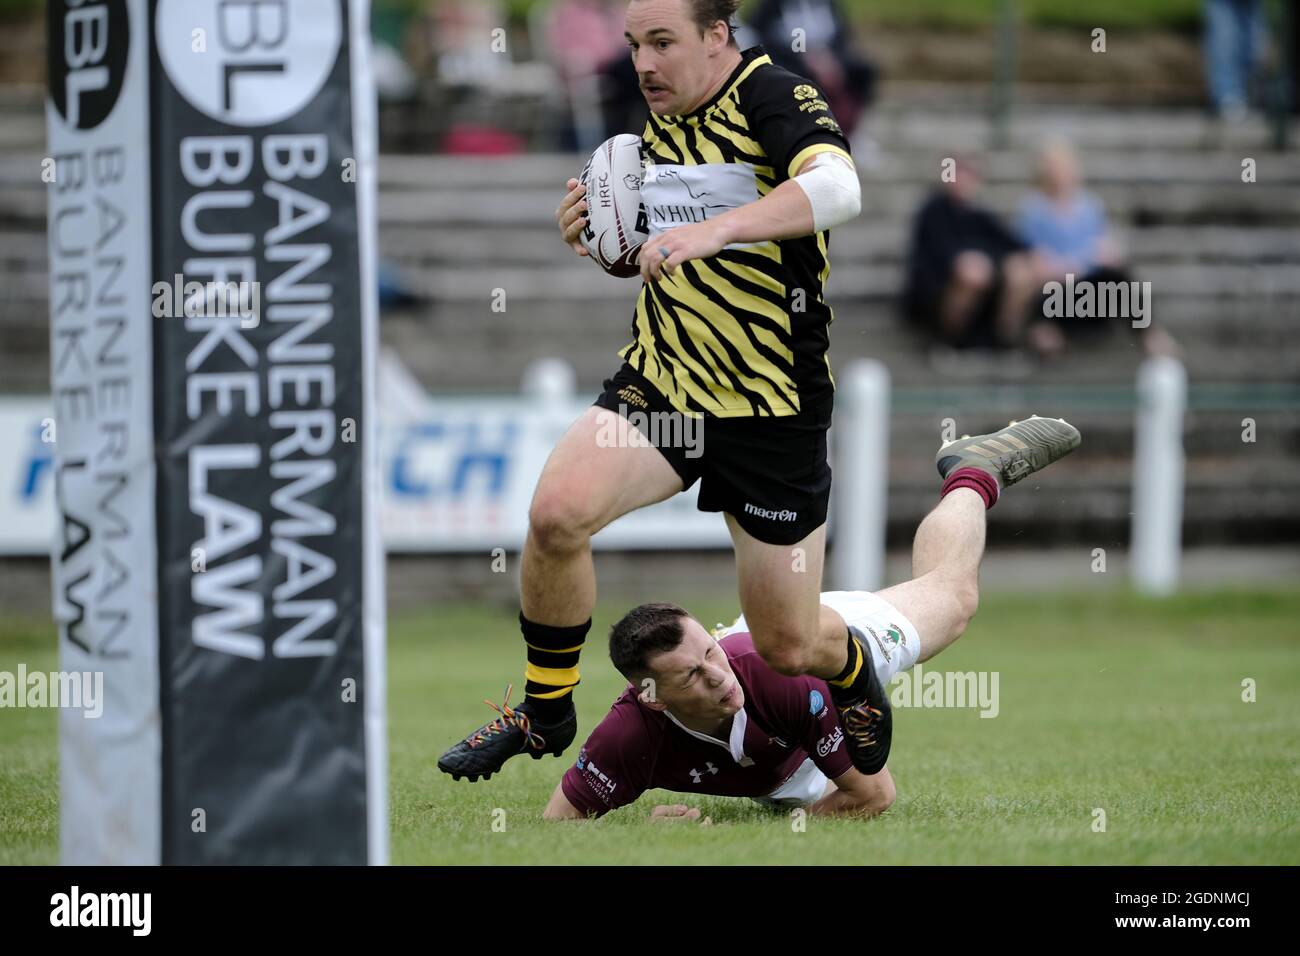 Hawick, UK. 14th Aug, 2021. Action from the Hawick 7s on Saturday 14 August 2021 at Mansfield, Hawick. Iain Chisholm (Melrose Rugby) with ball in hand heads for a try in the early pool match against Gala RFC Credit: Rob Gray/Alamy Live News Stock Photo